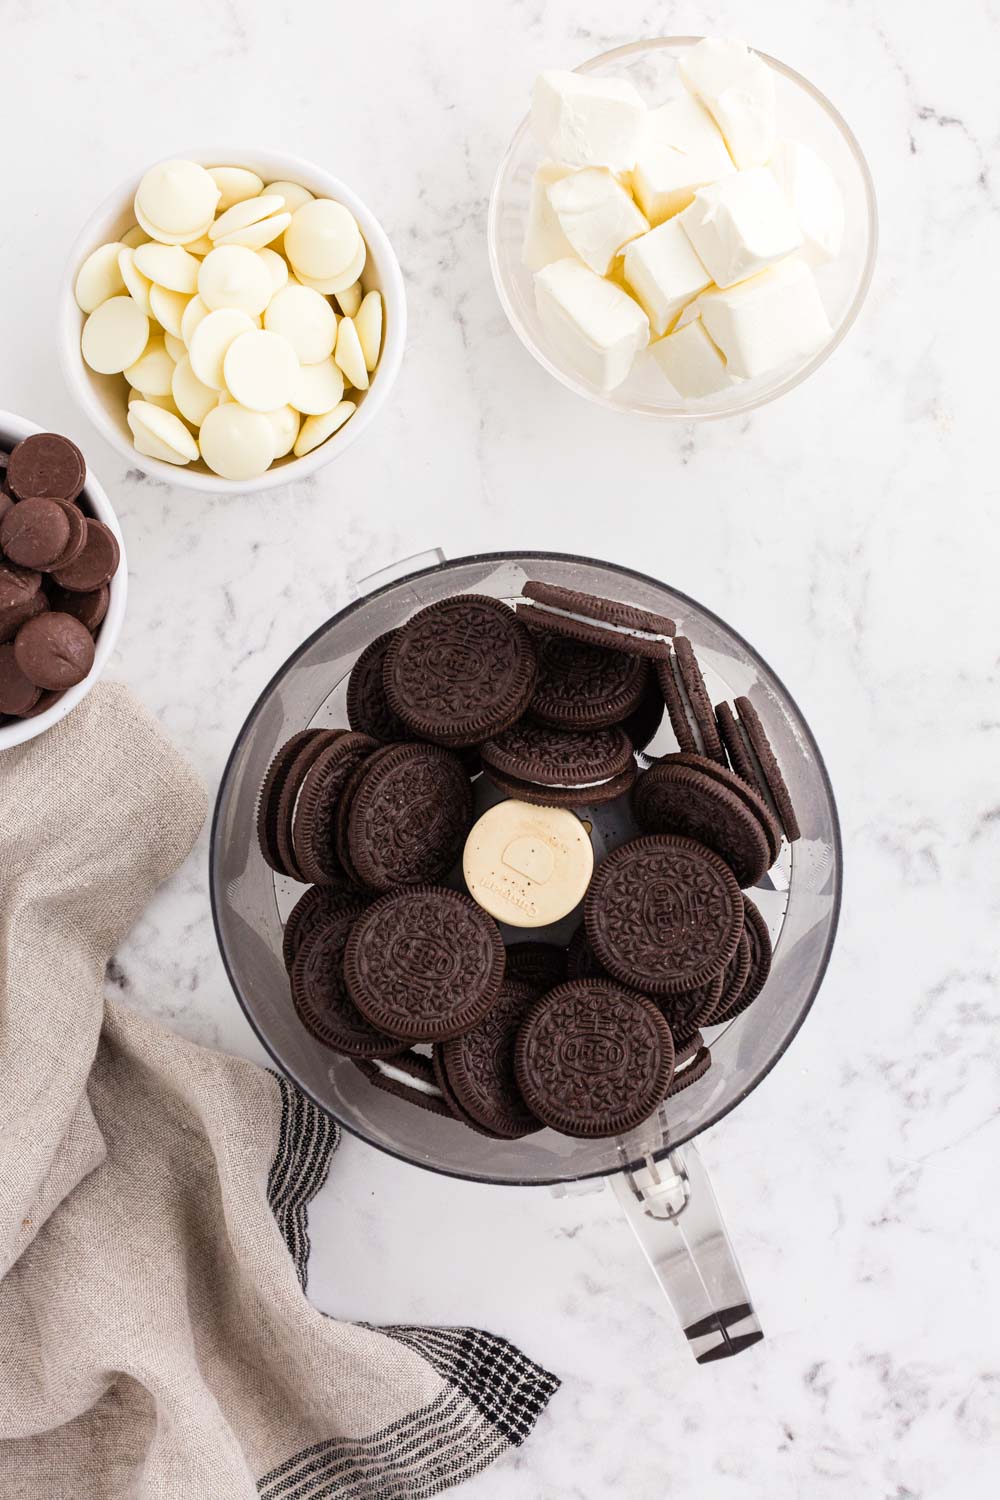 Whole Oreo cookies in a food processor, bowl of cream cheese, bowl of dark chocolate melting wafers, bowl of white chocolate melting wafers, beige linen, on a white marble countertop